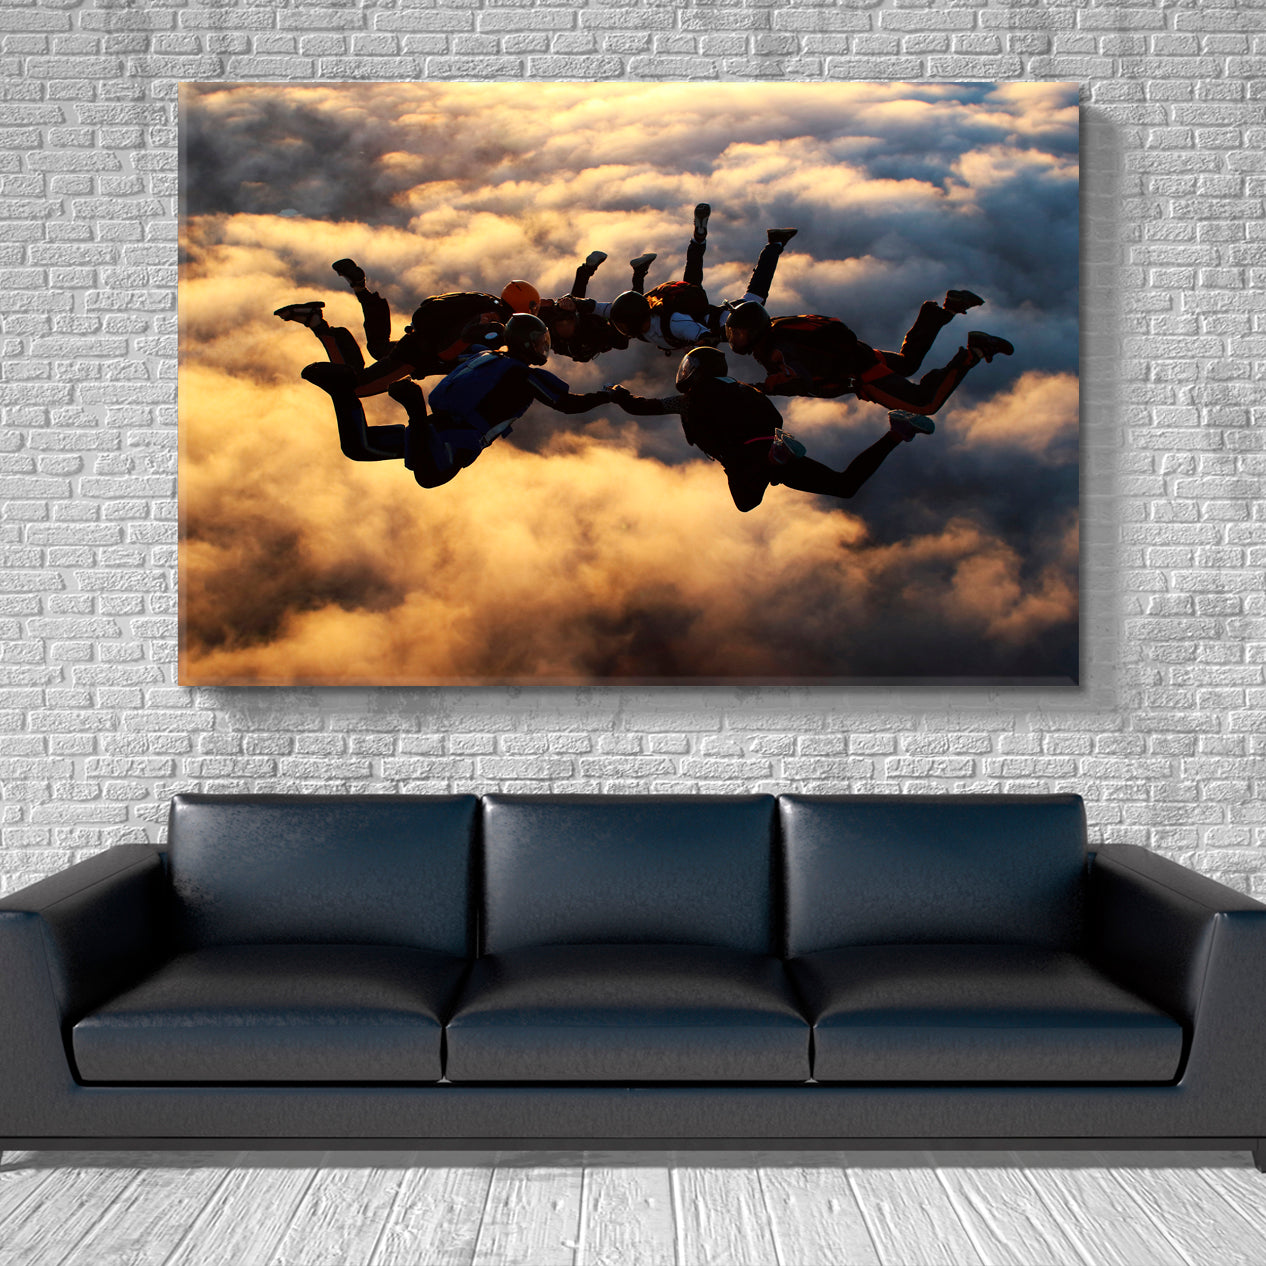 Sunset Skydiving Skyscape Canvas Artesty 1 panel 24" x 16" 